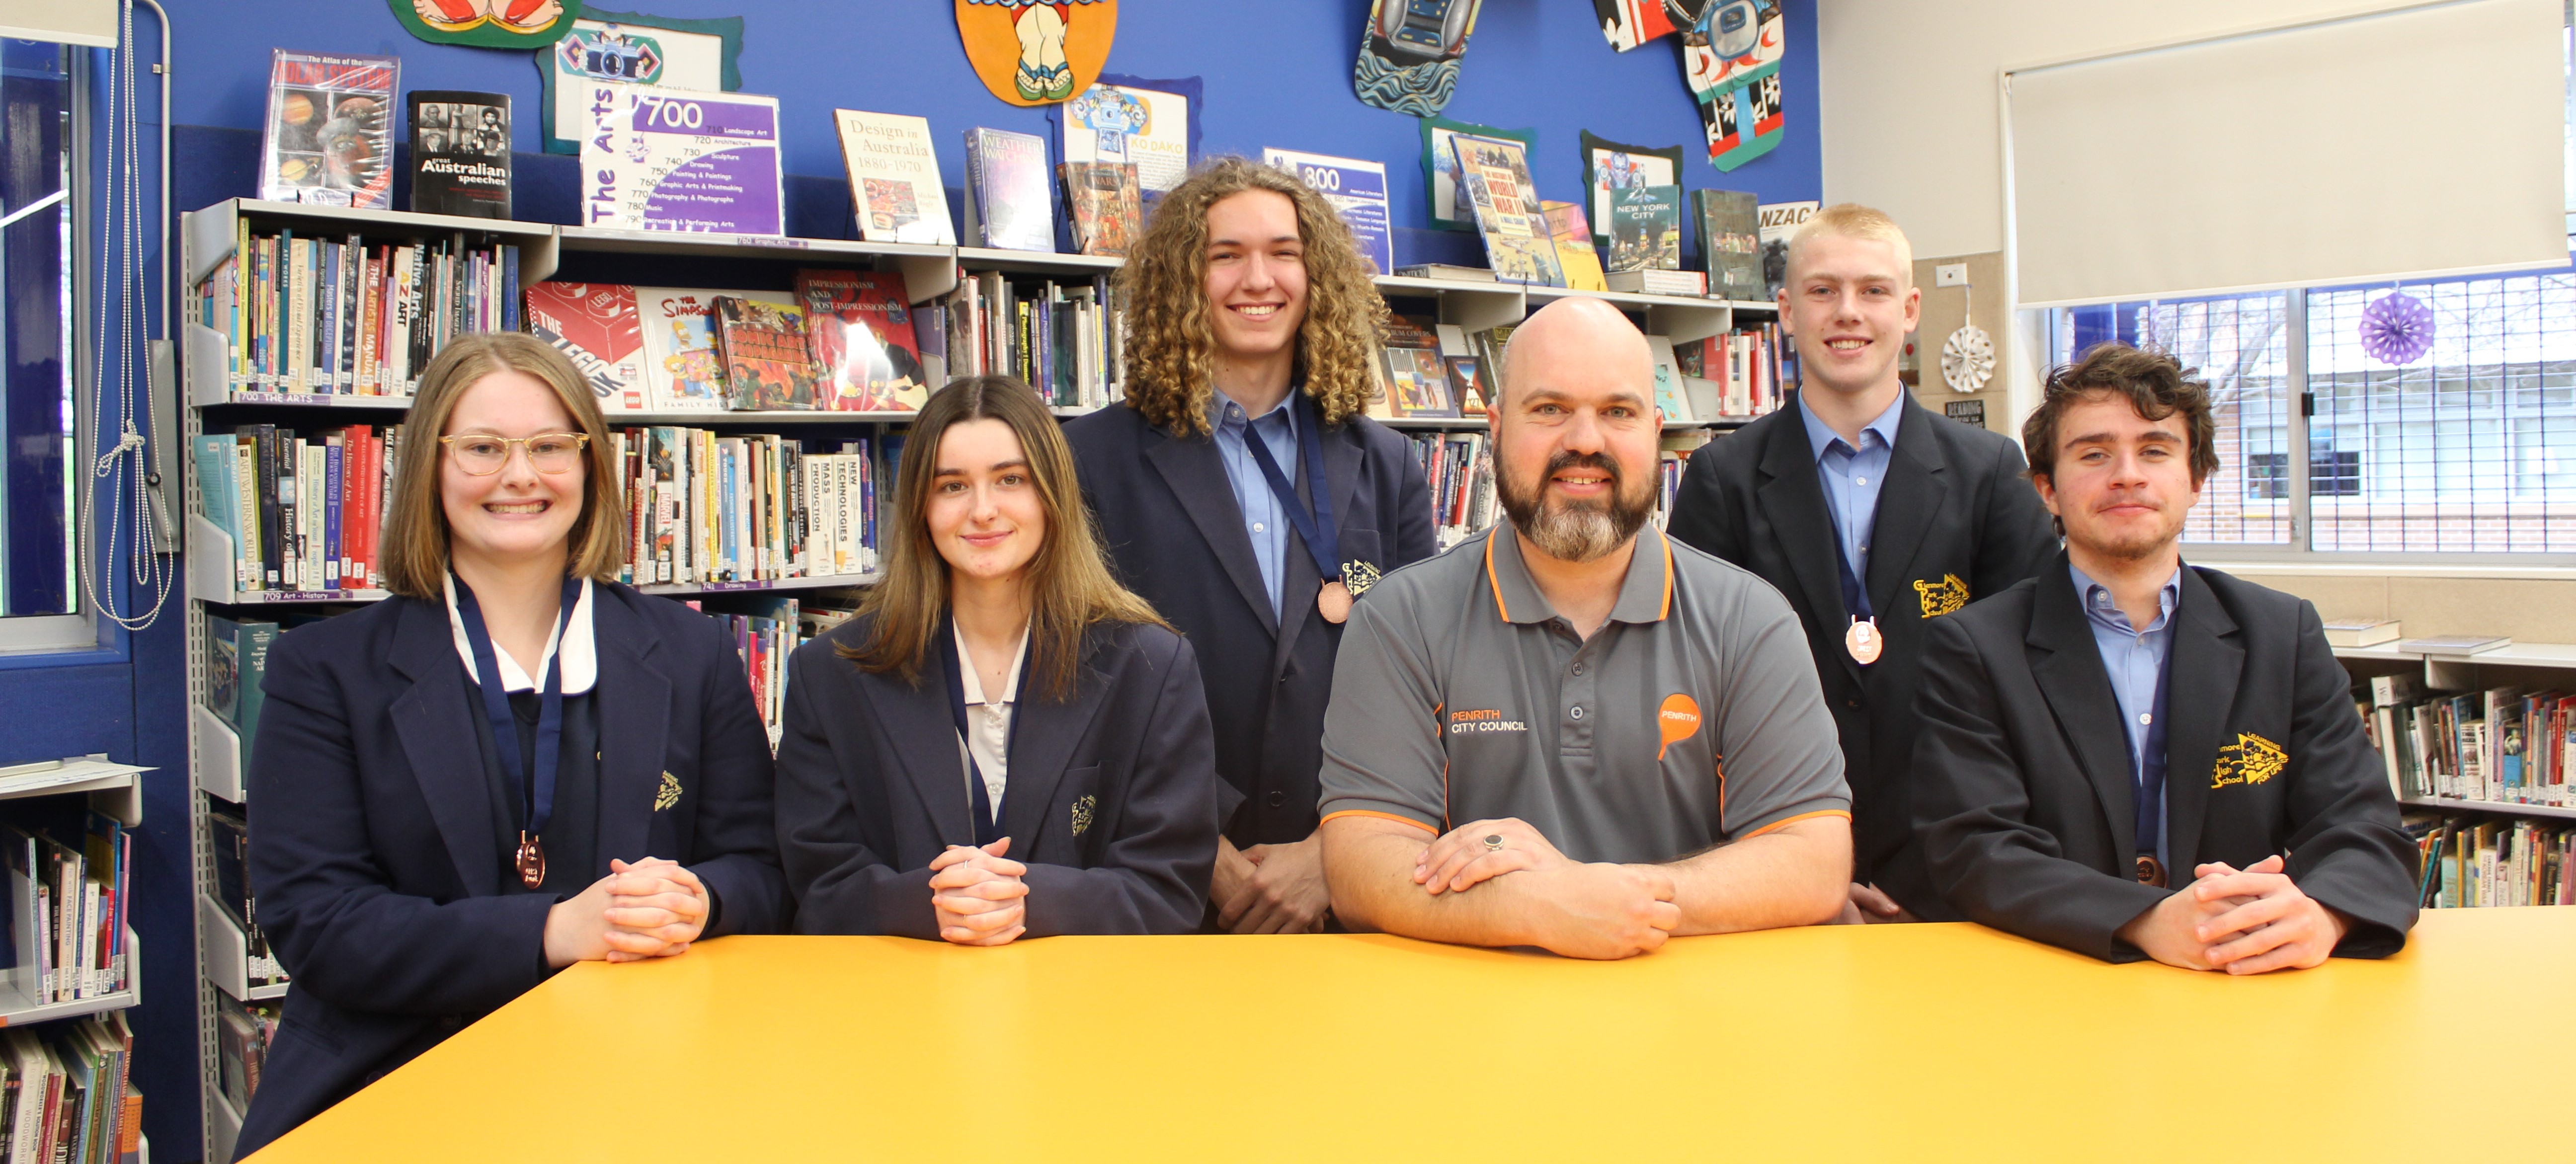 Council’s Sustainability Education Officer, Andrew Hewson, pictured with Glenmore Park High School’s STEM CPP students.